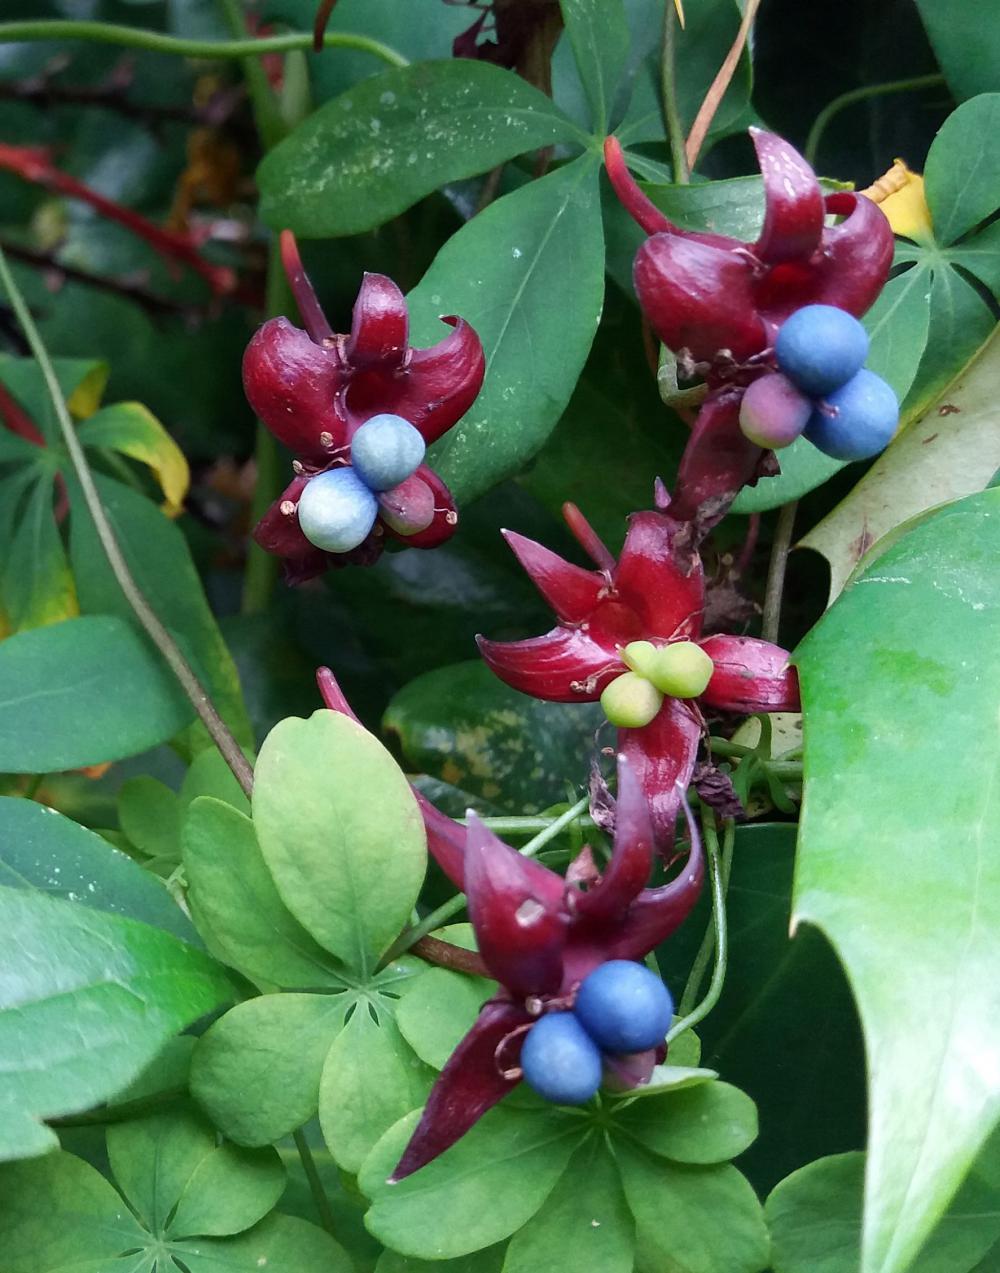 Find more unusual autumn fruits